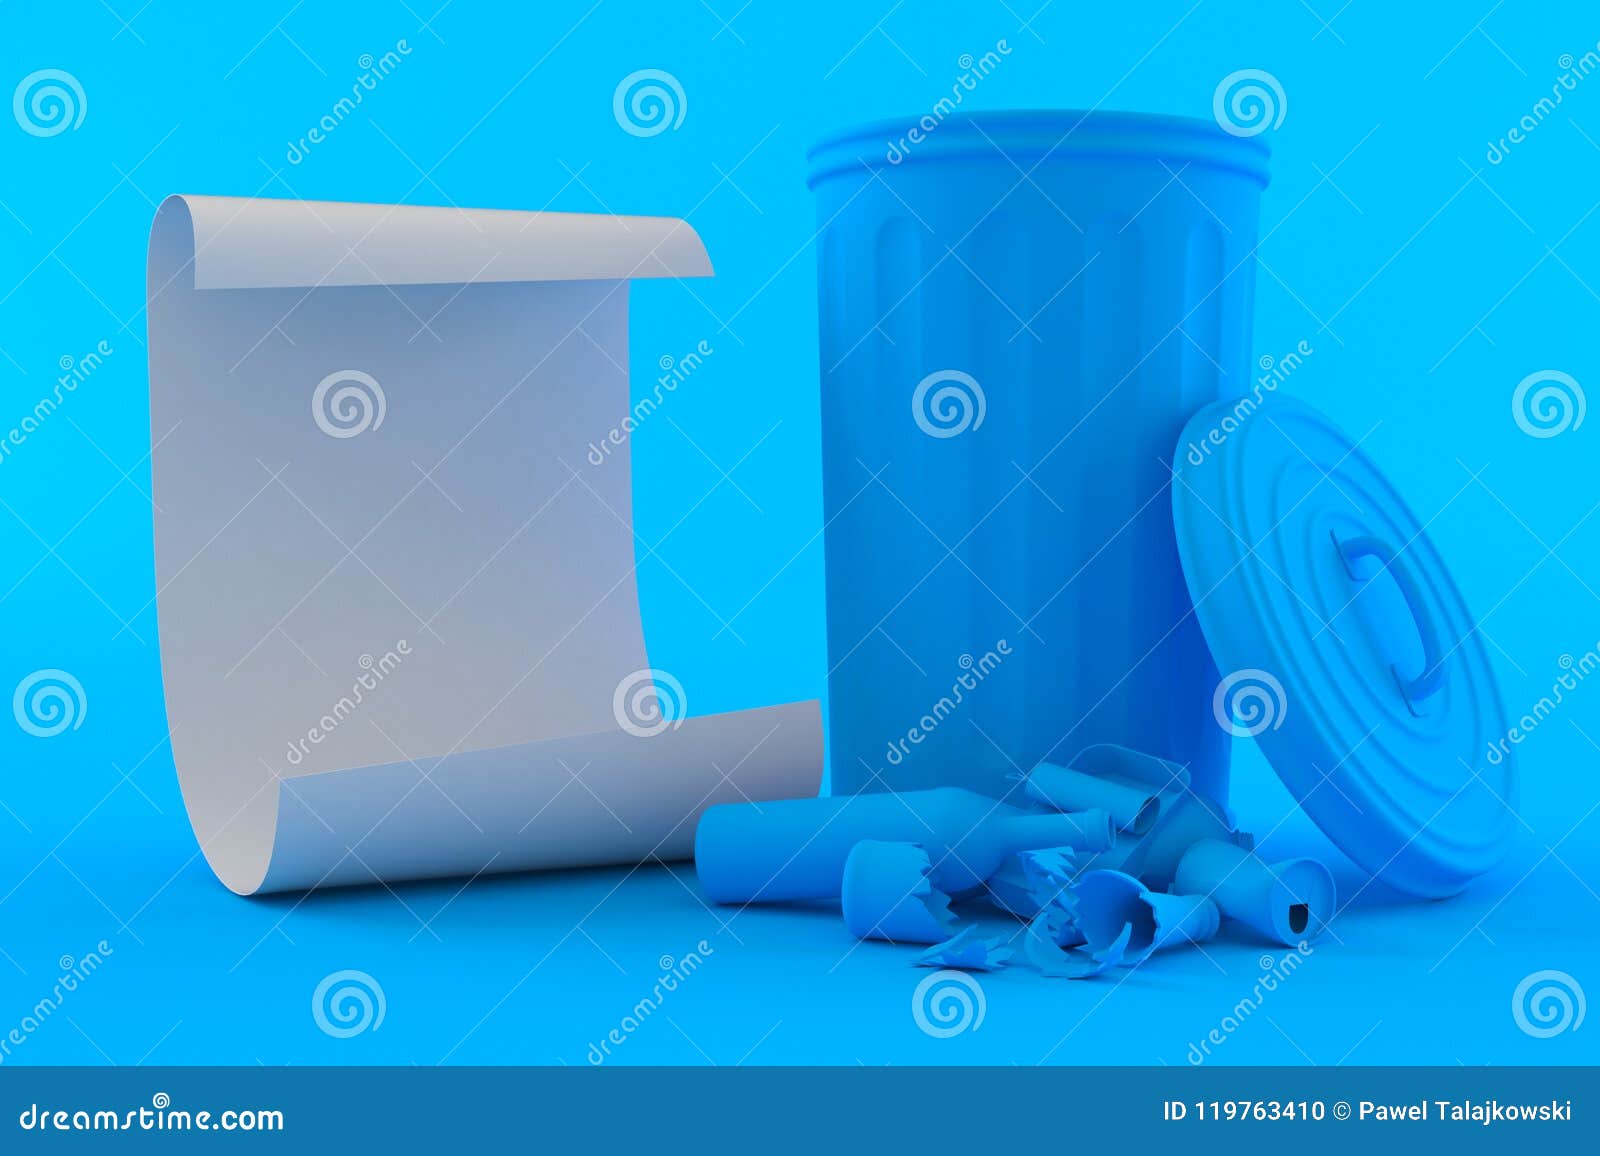 Environment Background with Sheet of Paper Stock Illustration ...